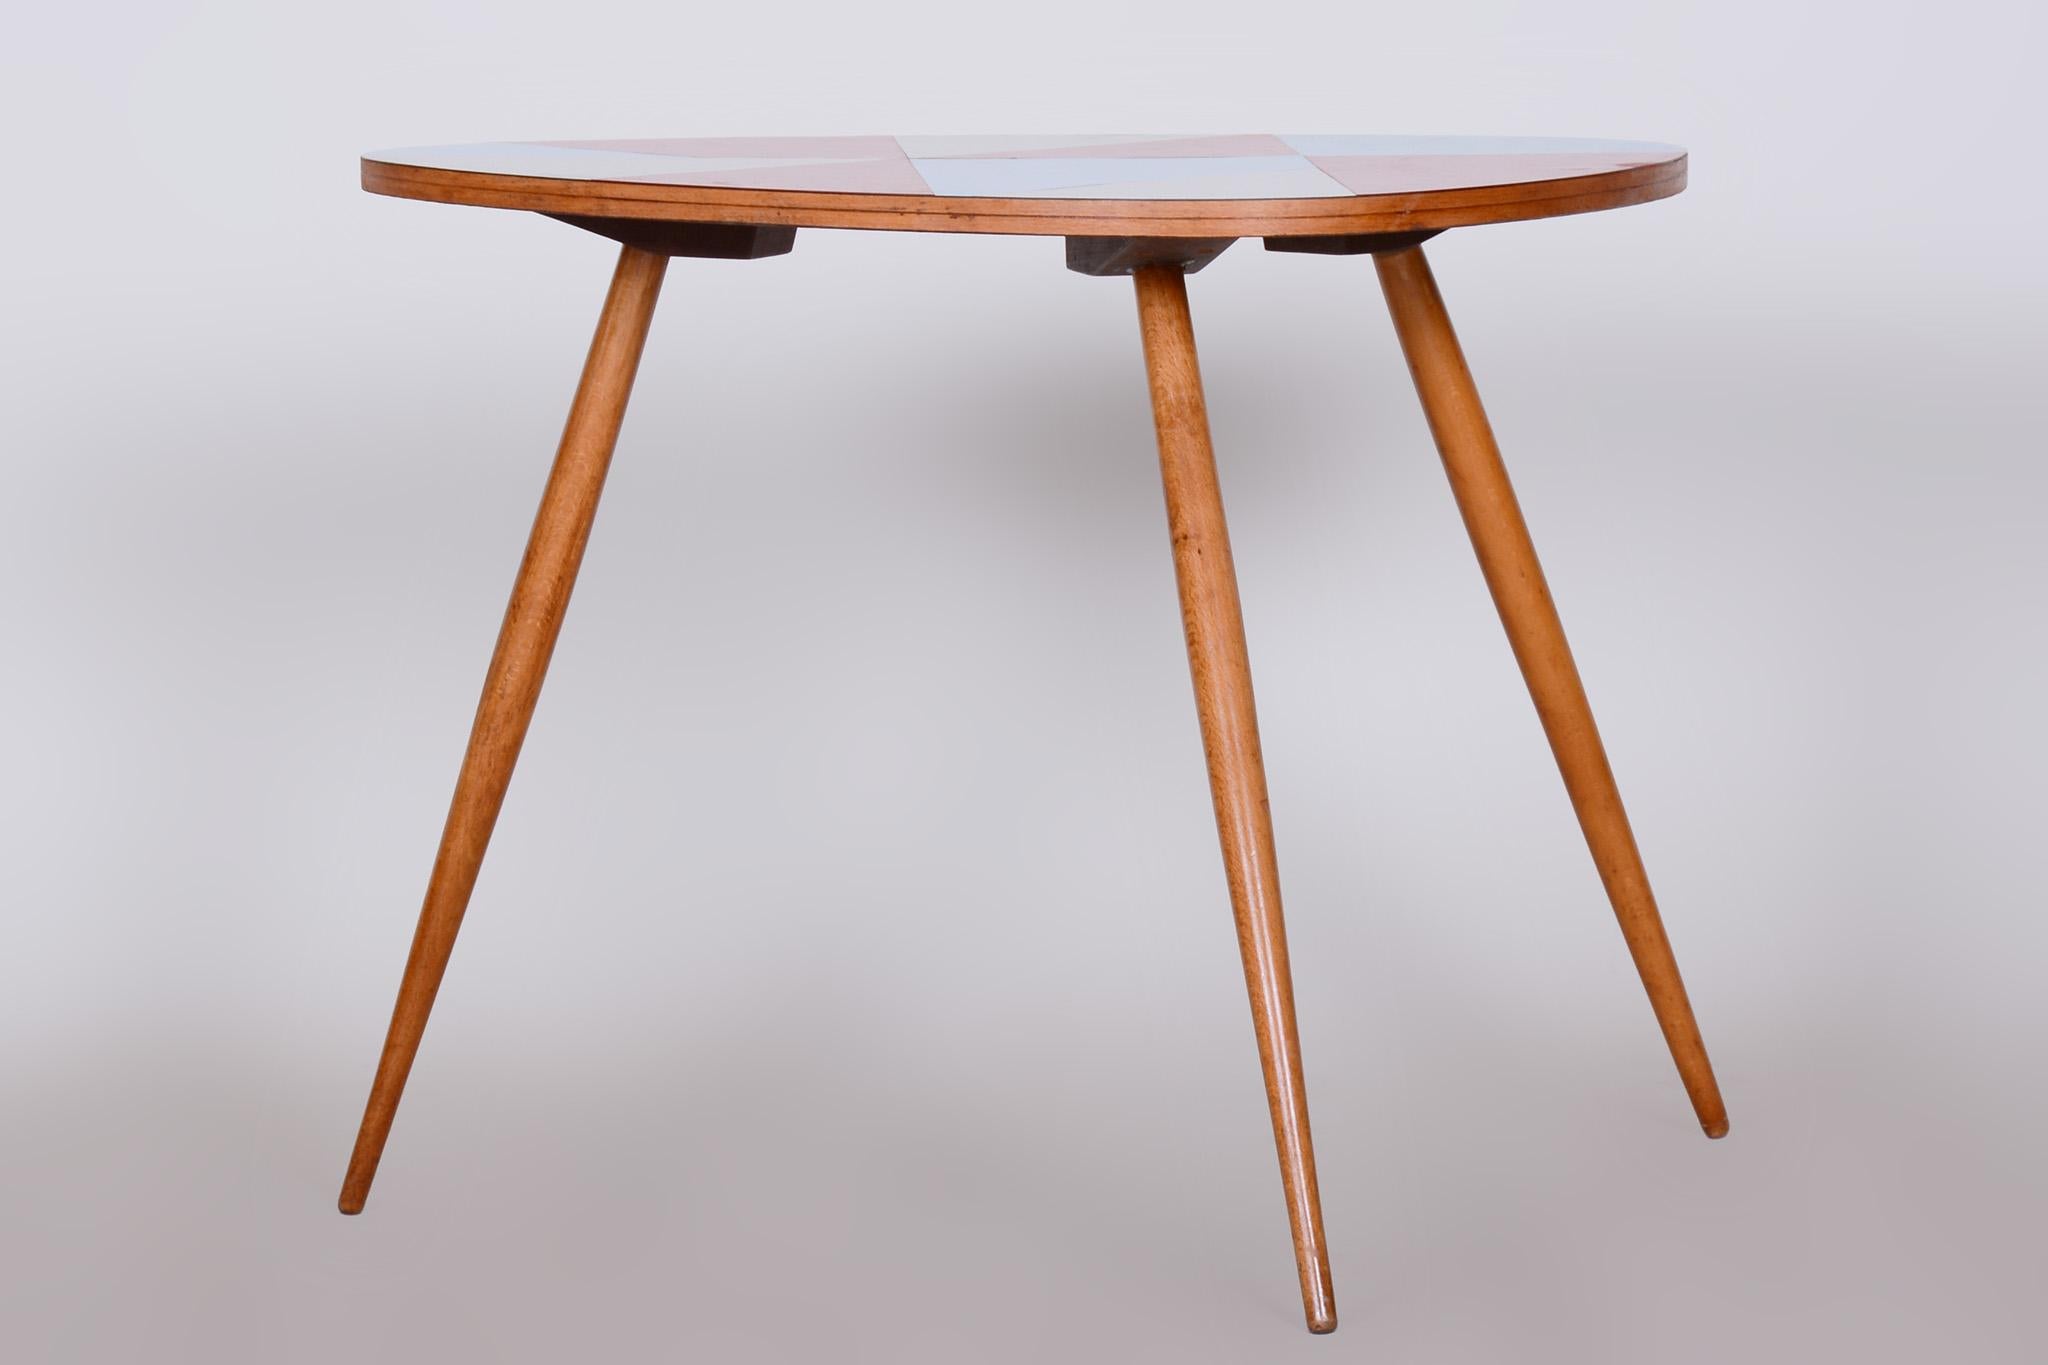 Art Deco Small Restored Midcentury Table, Beech and Umakart, Czechia, 1950s For Sale